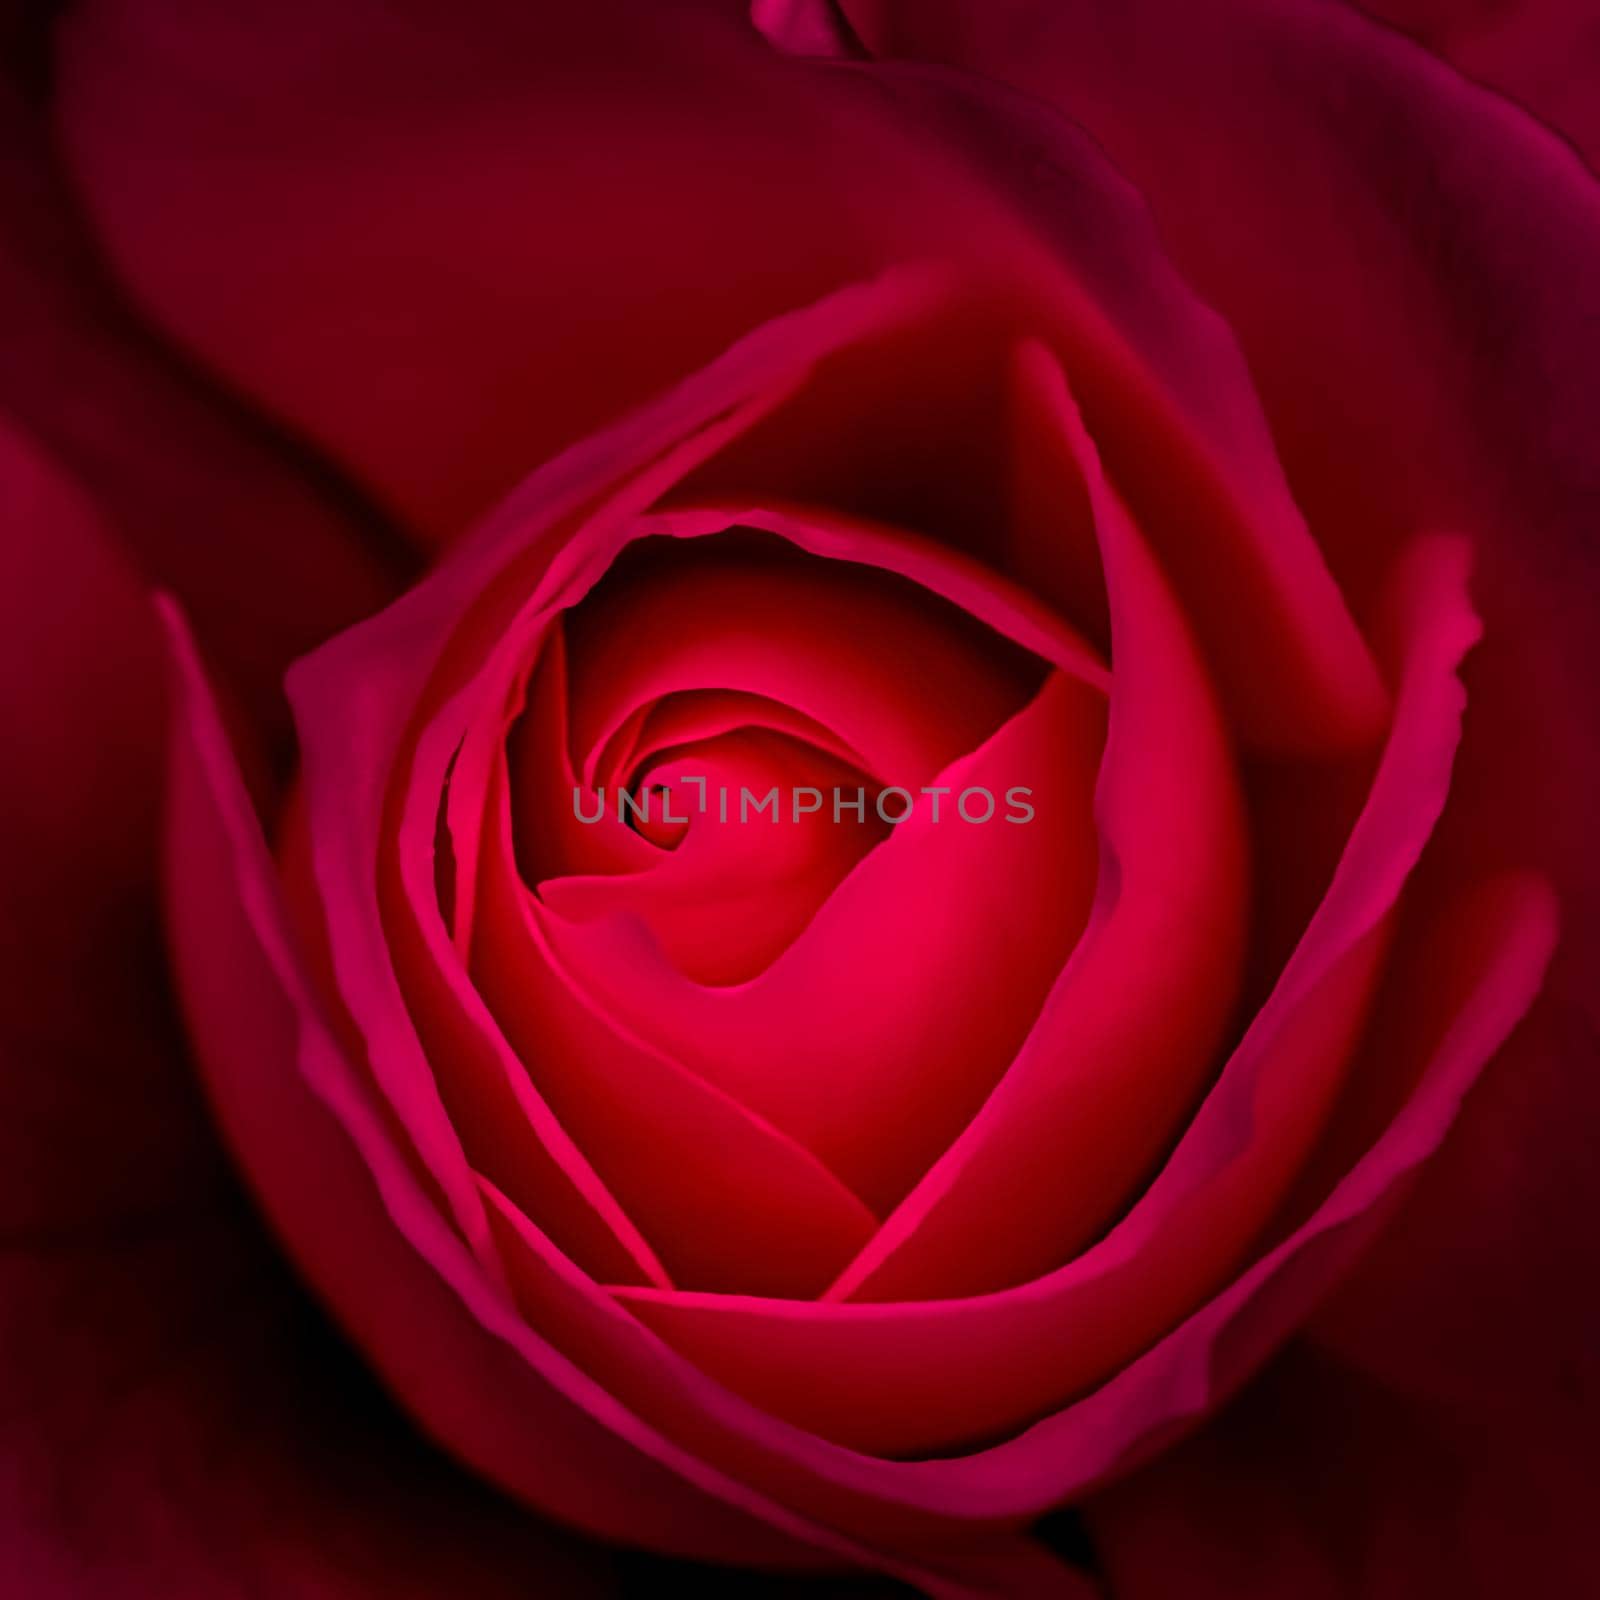 Abstract floral background, red rose flower petals. Macro flowers backdrop for holiday design. Soft focus.